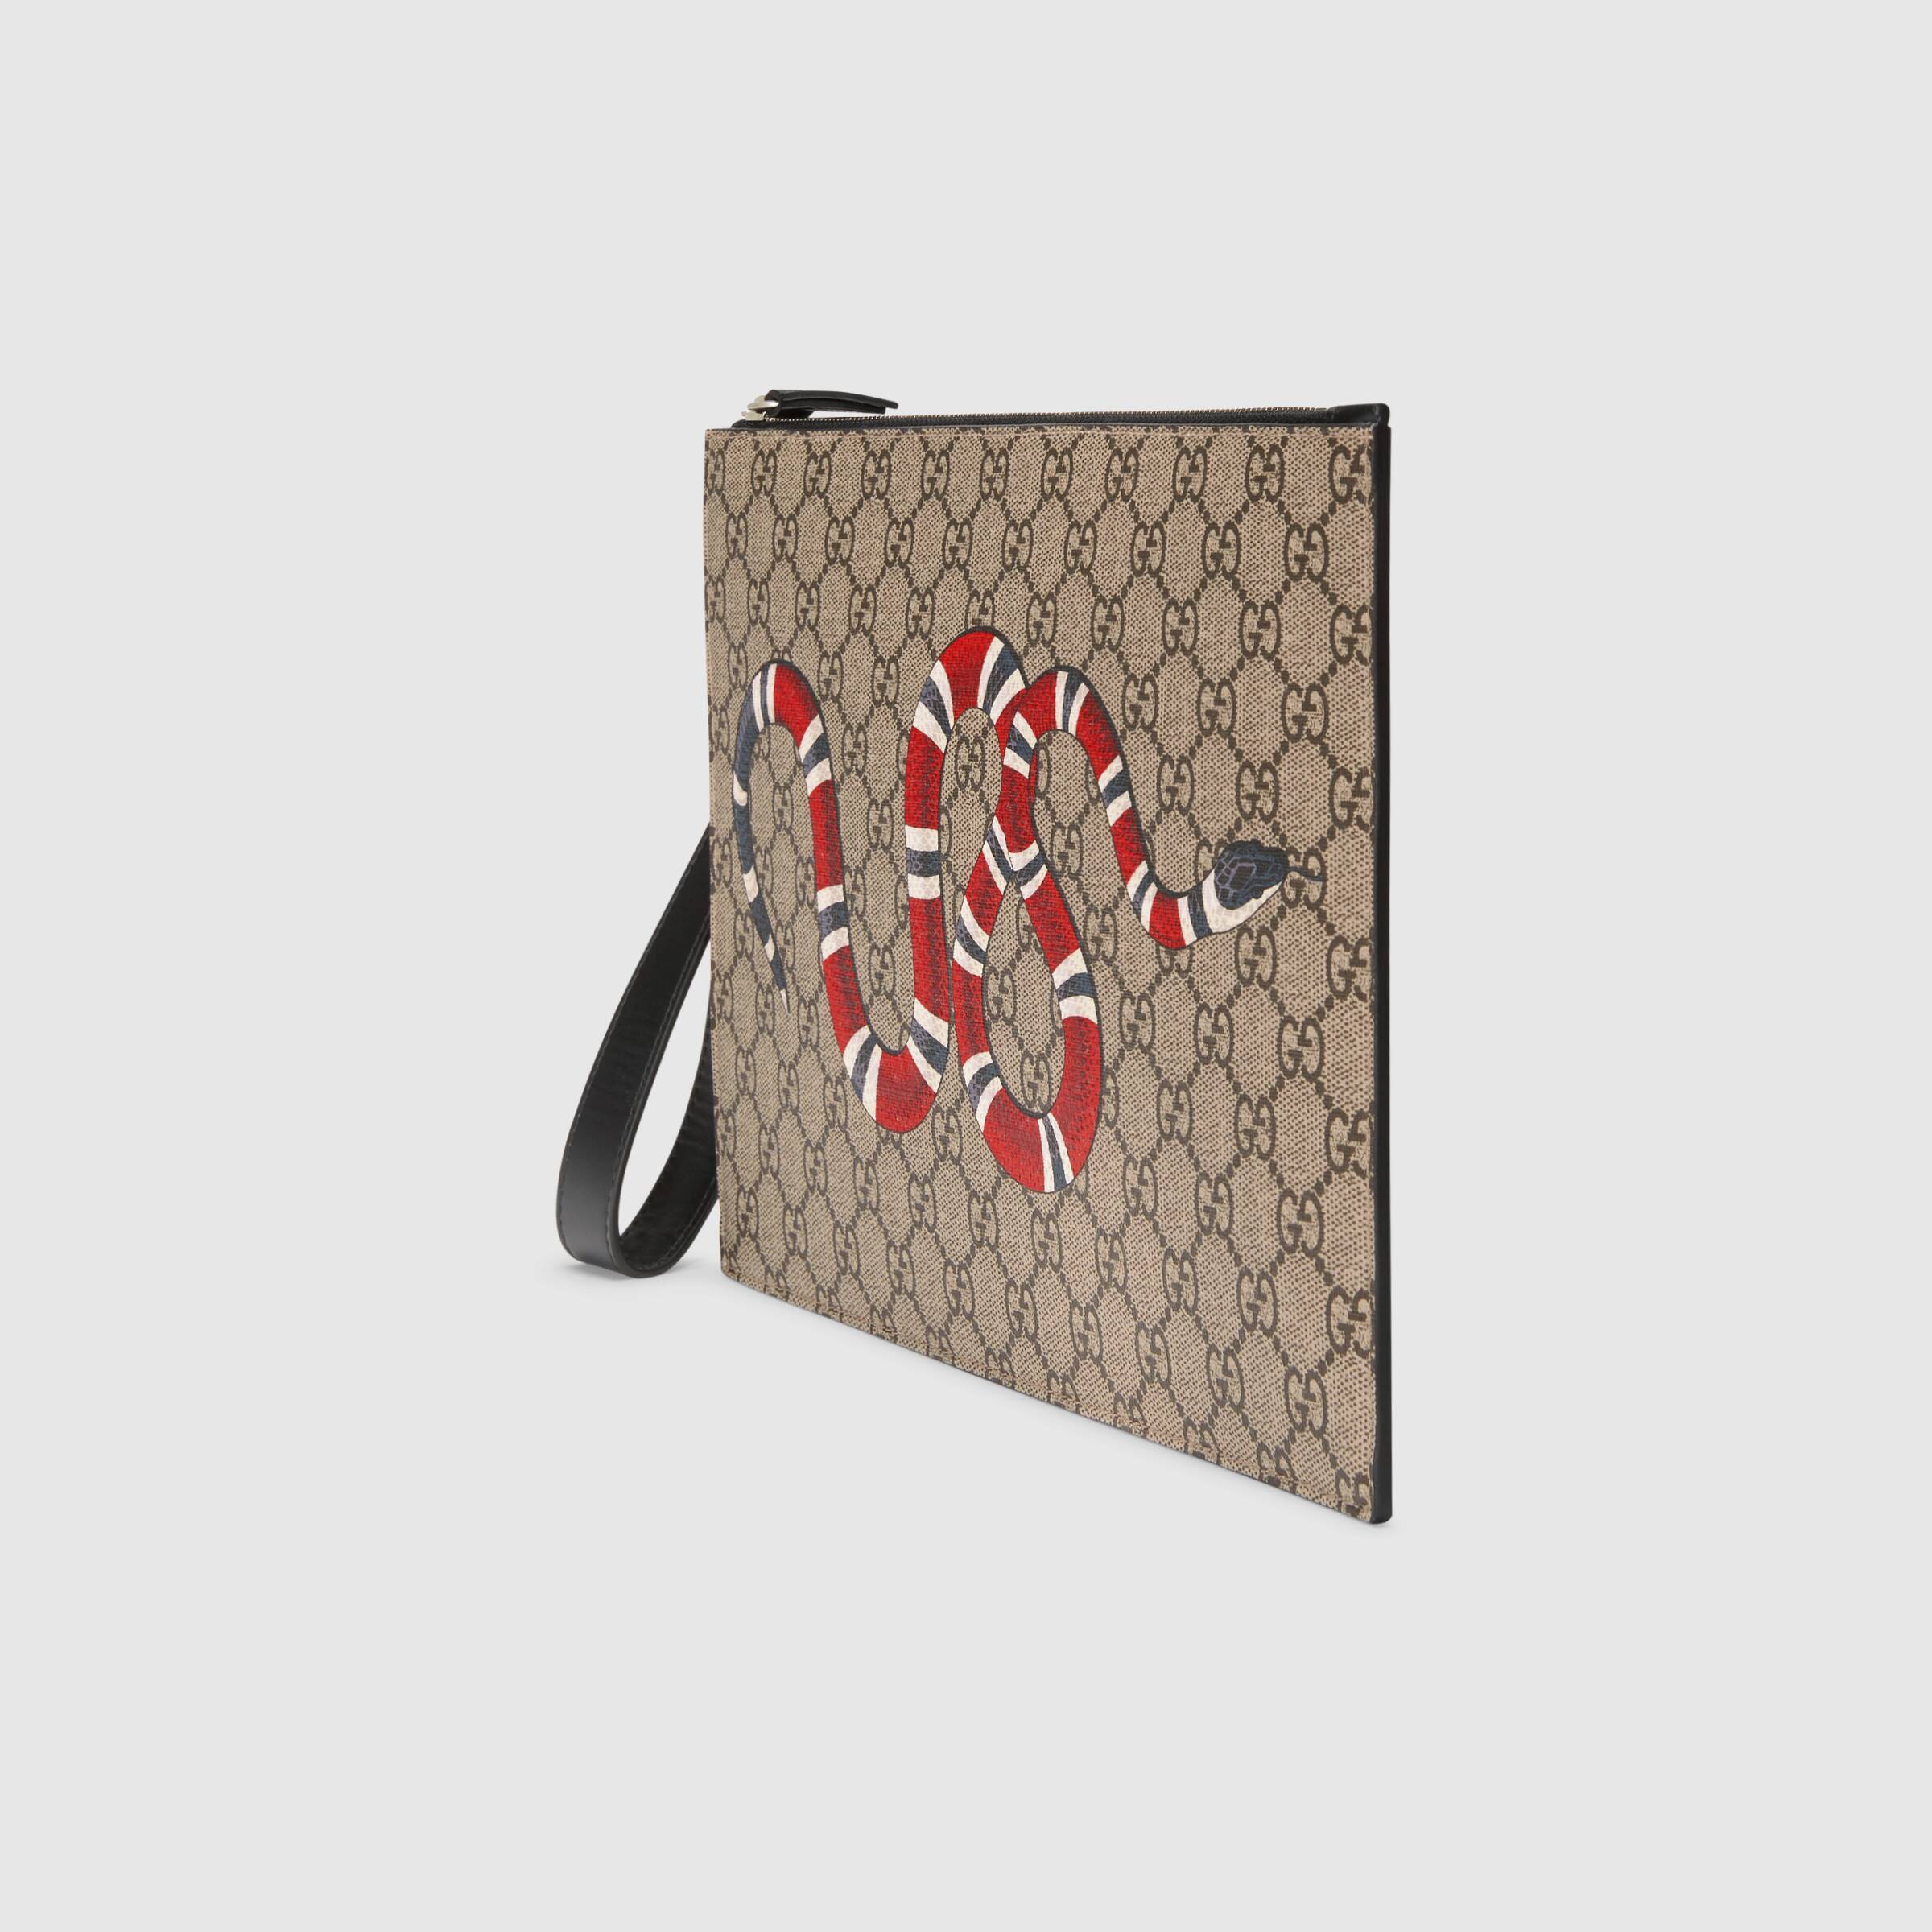 Gucci Bestiary Pouch with Kingsnake